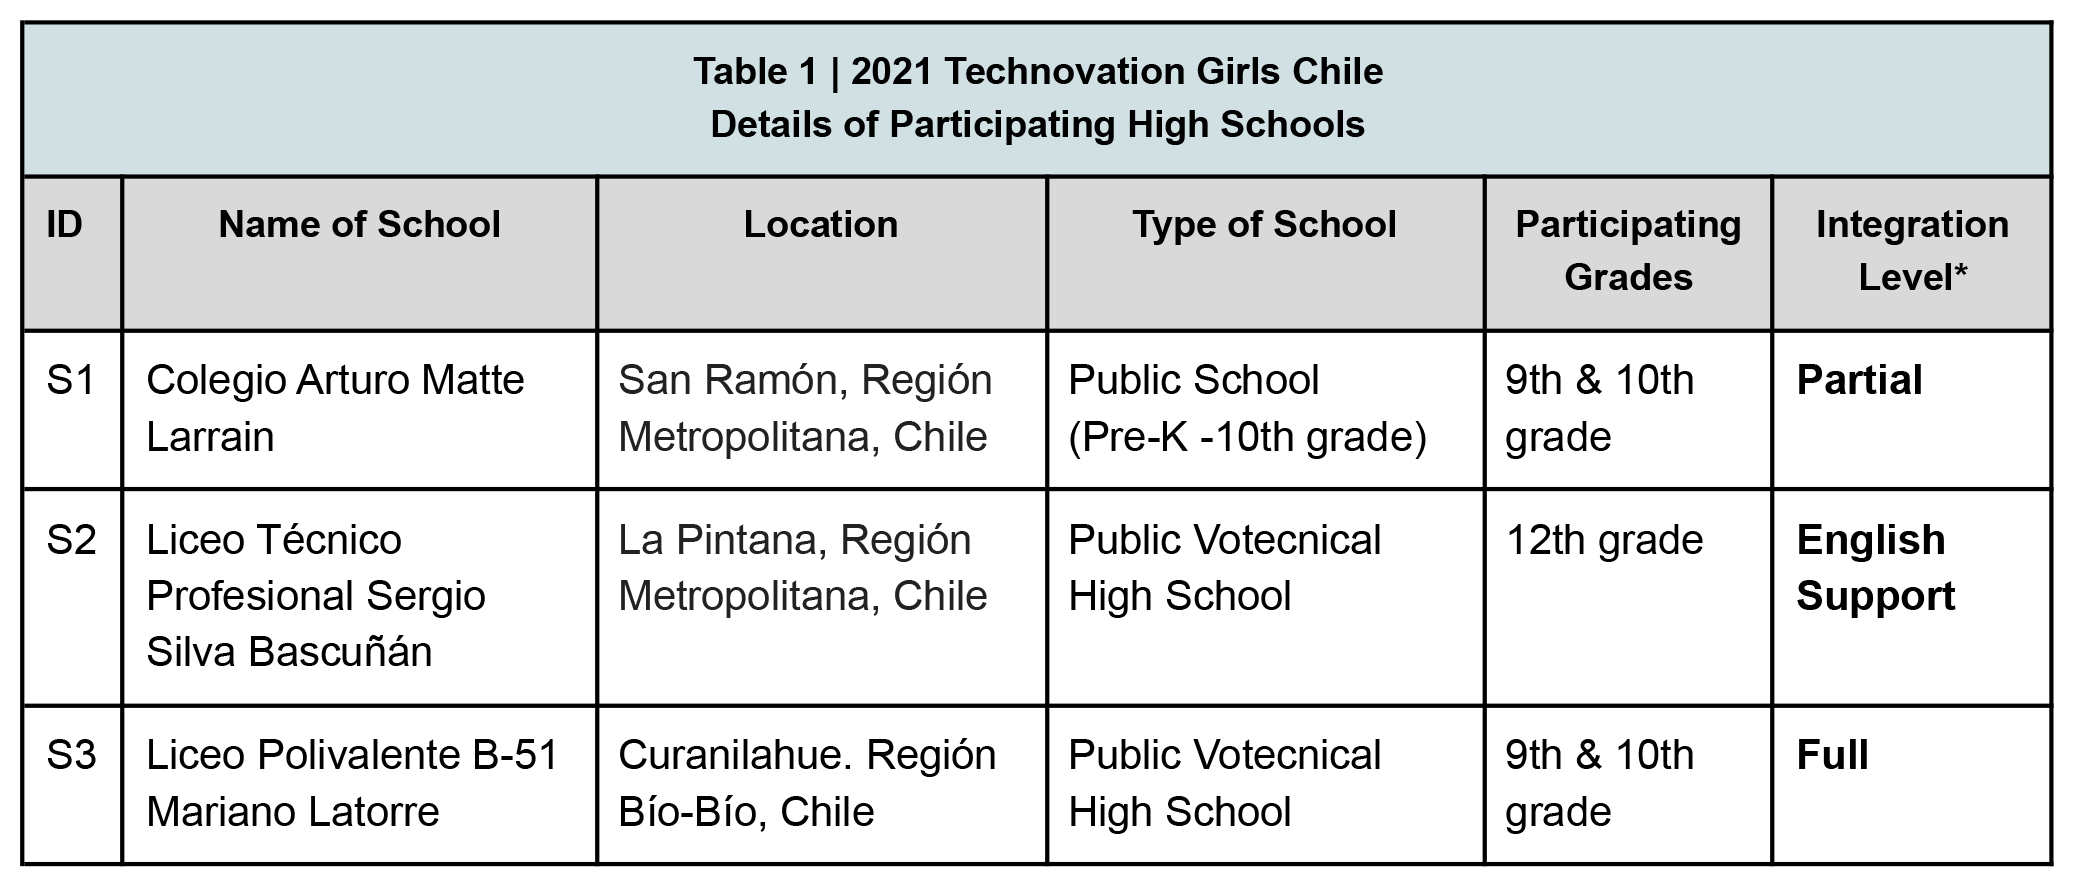 The following table lists de details of the participating high schools: